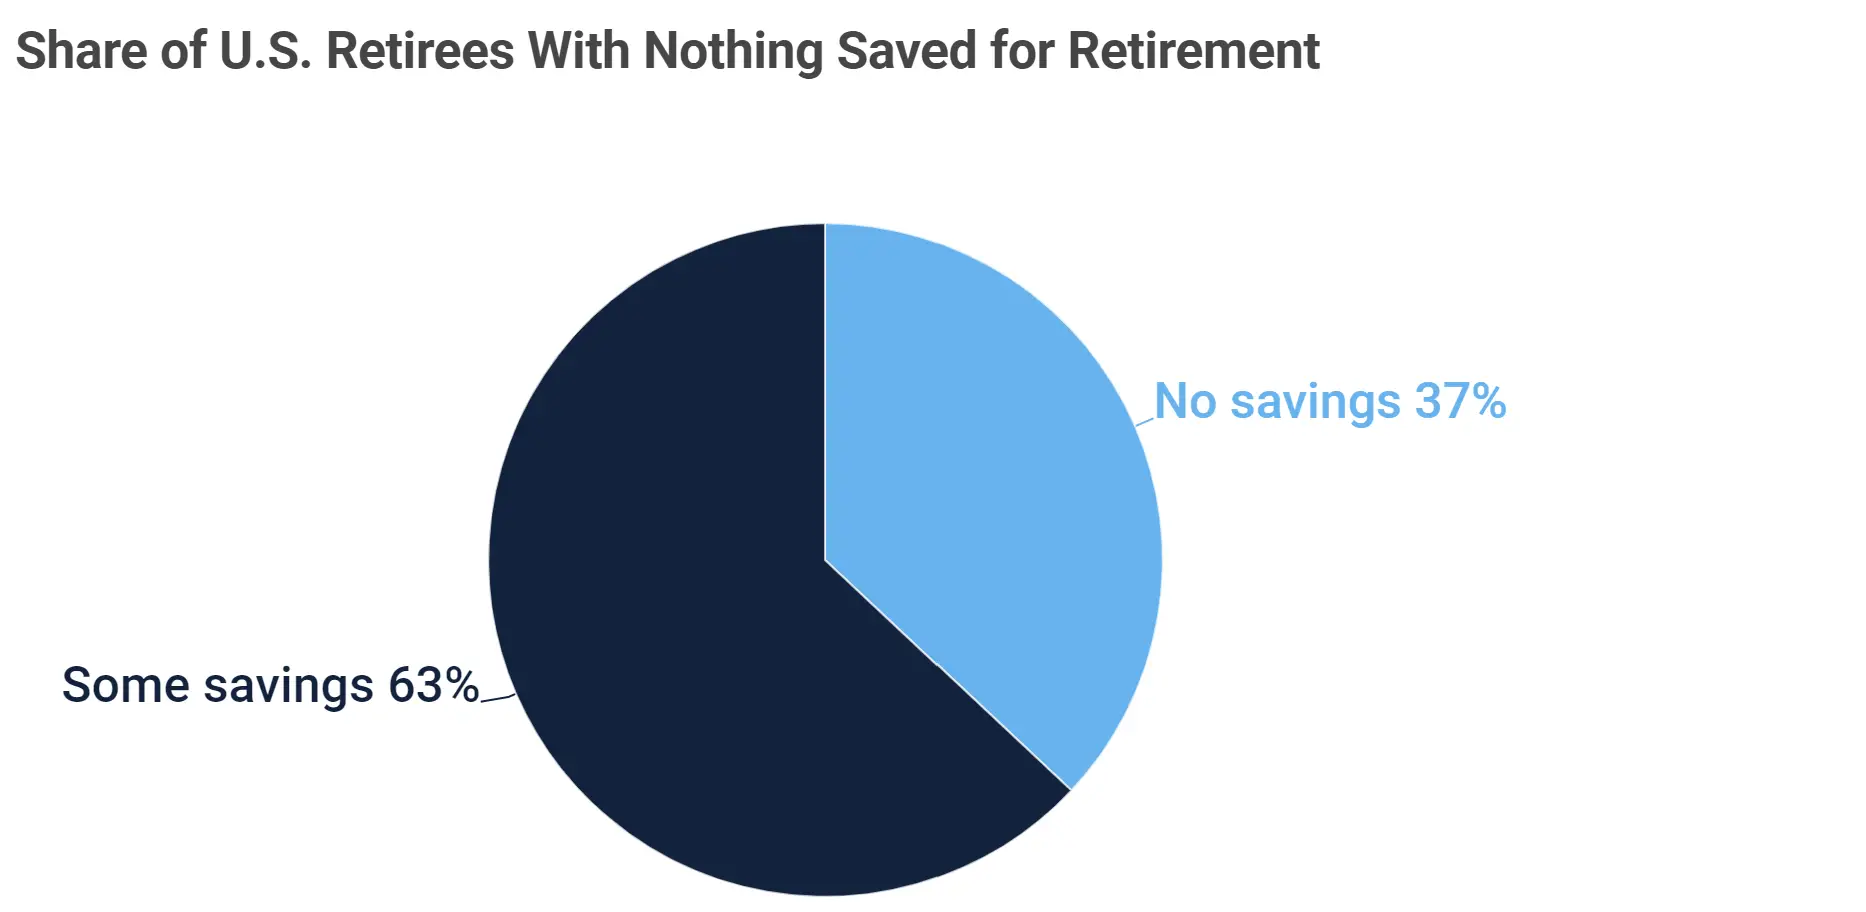 Share of US Retirees with nothing saved for retirement from Clever infographic